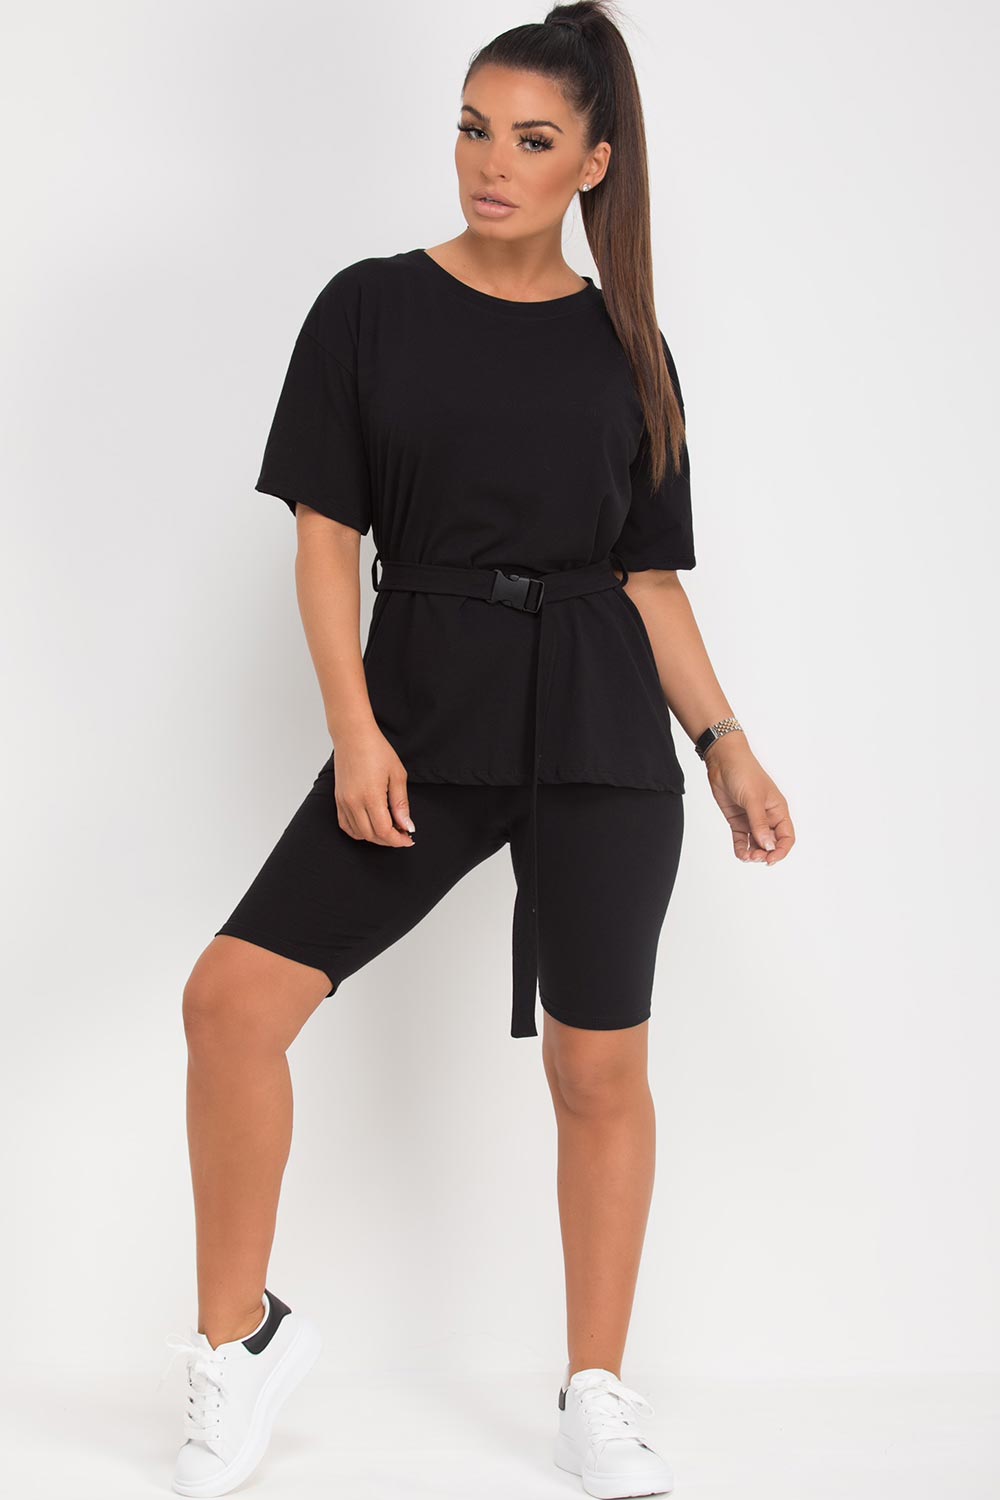 Women's Cycling Shorts & Oversized Top Set With Utility Belt Black